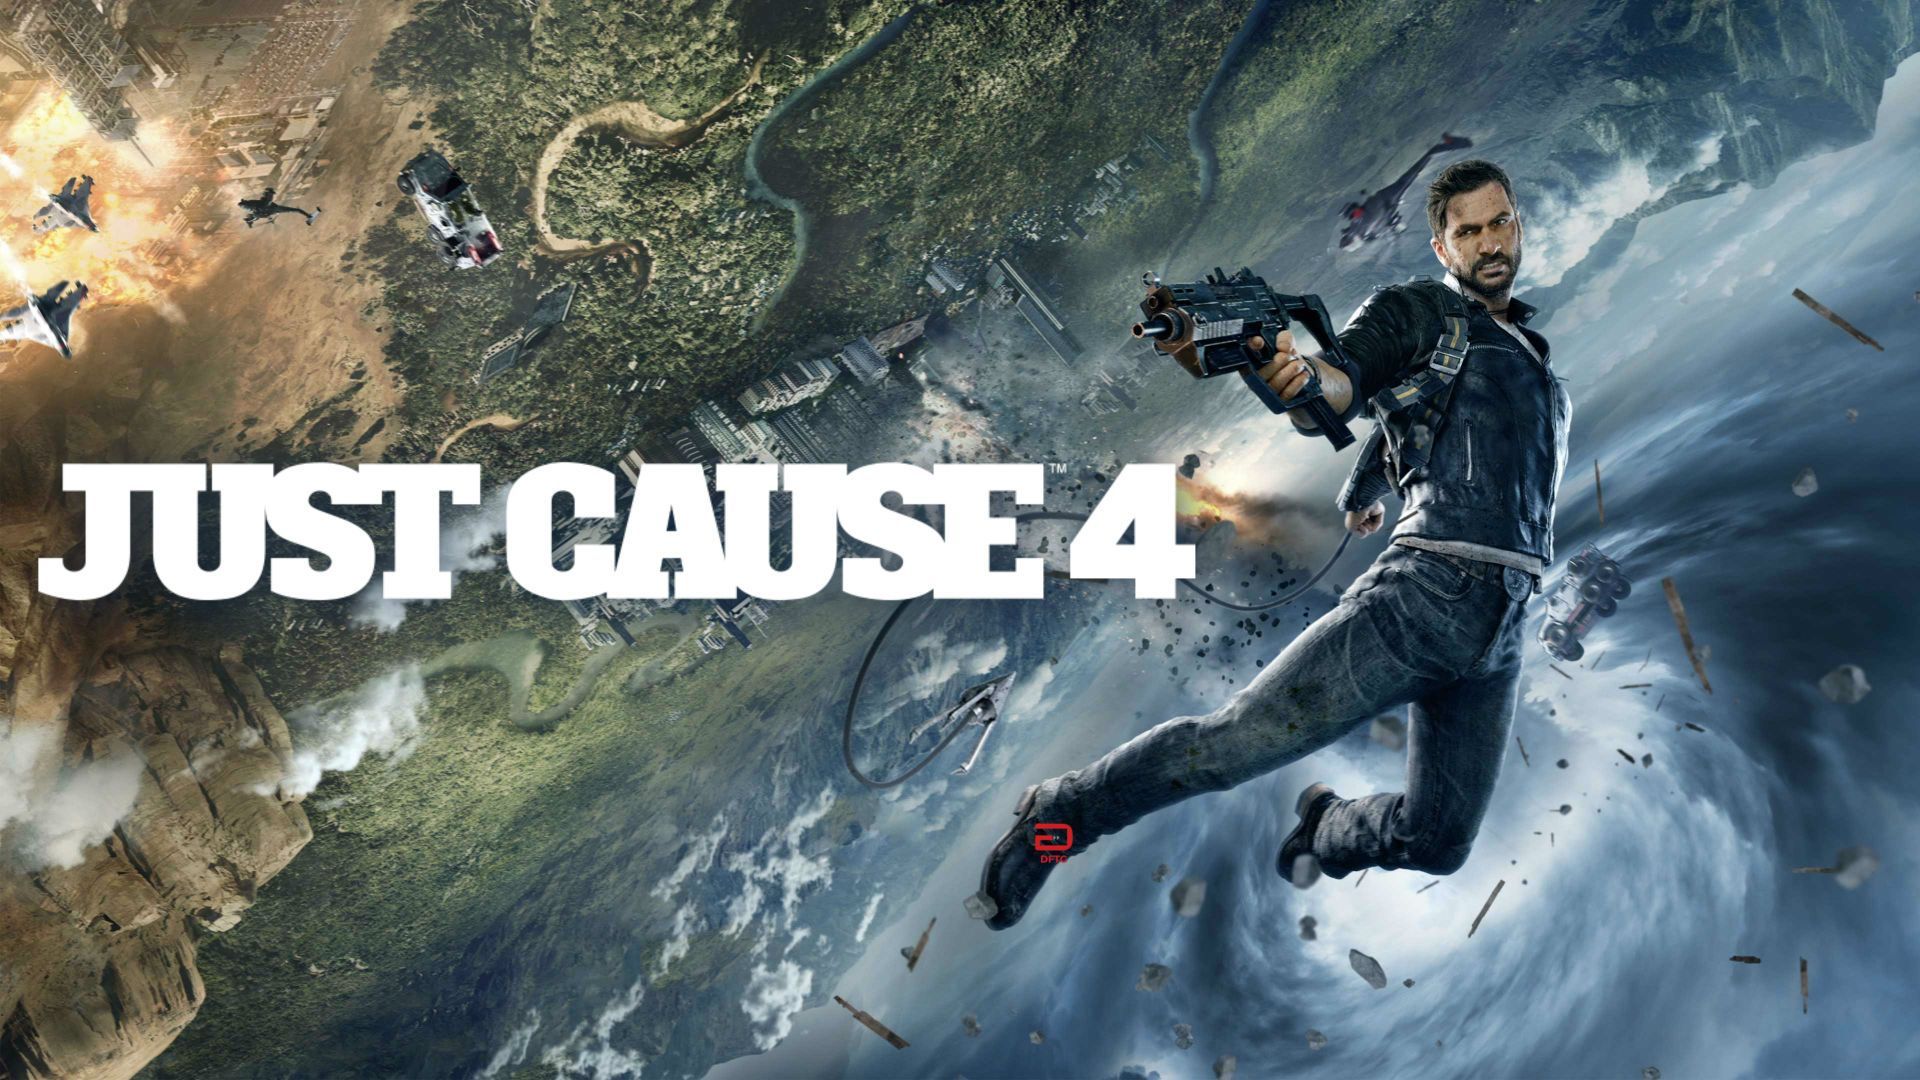 just cause 4 wallpapers wallpaper cave on just cause 4 hd wallpapers